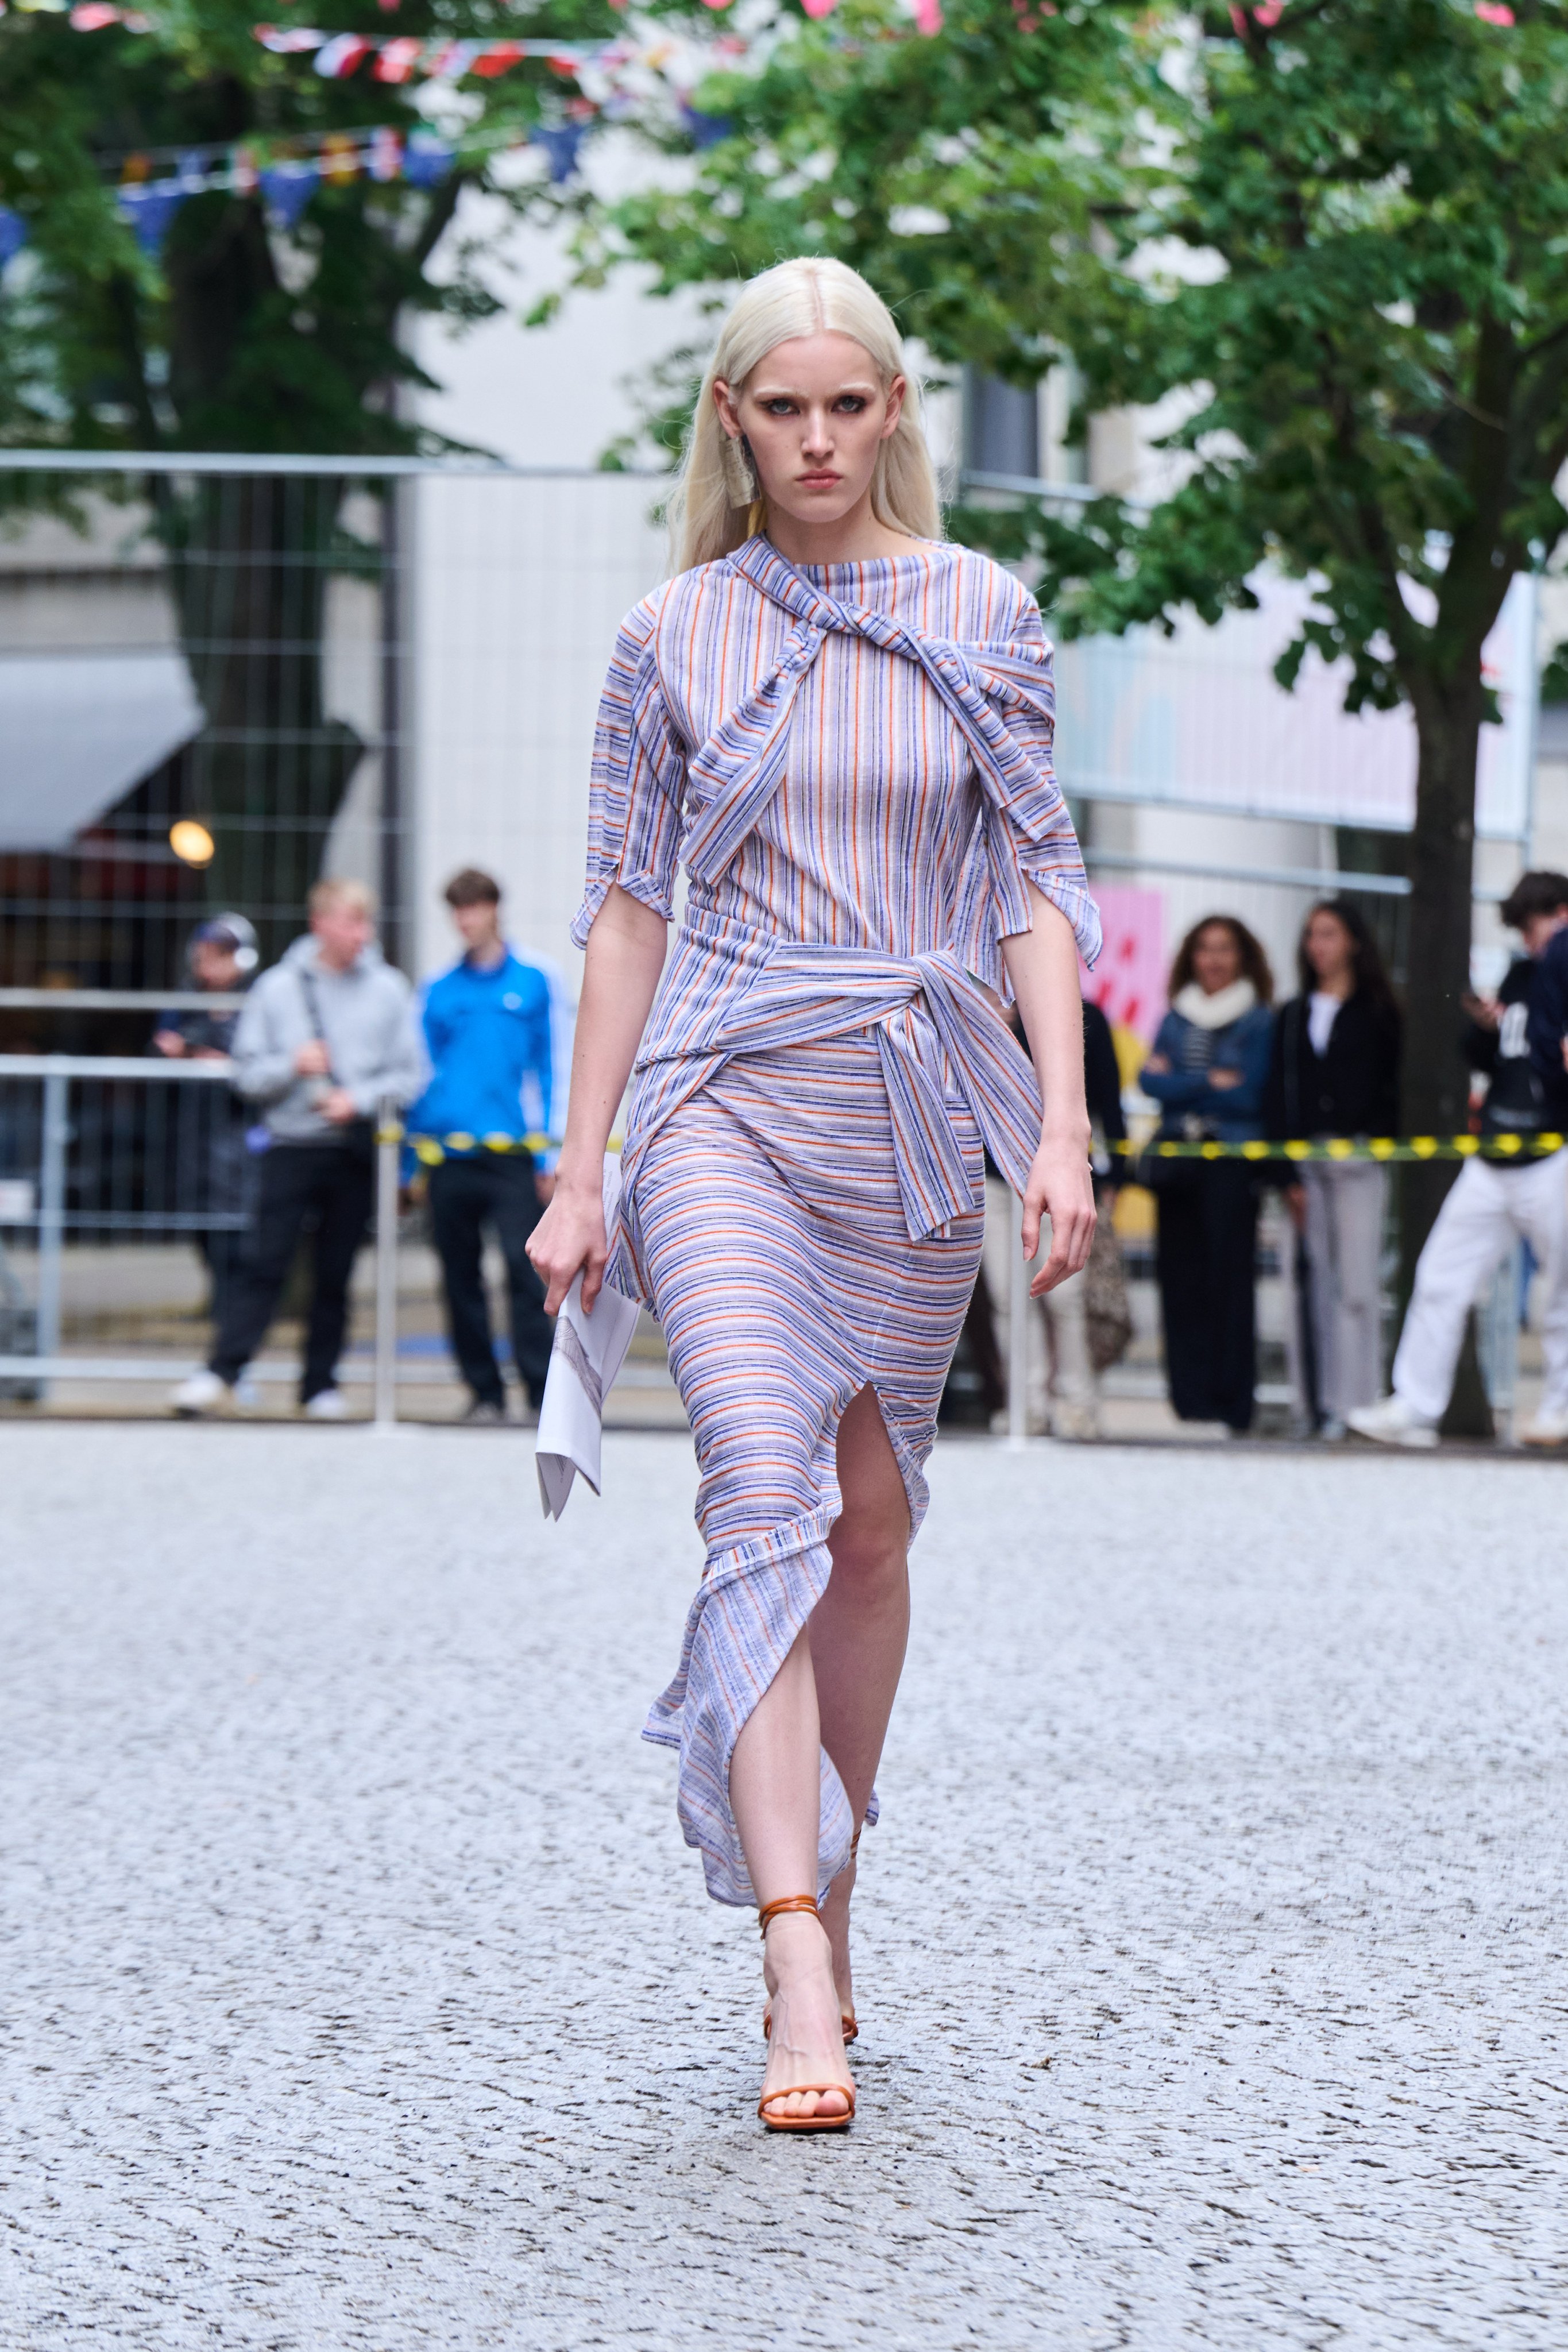 A model walks the runway in a look from Avenir’s spring/summer 2025 collection at Berlin Fashion Week. Photo: Annette Riedl